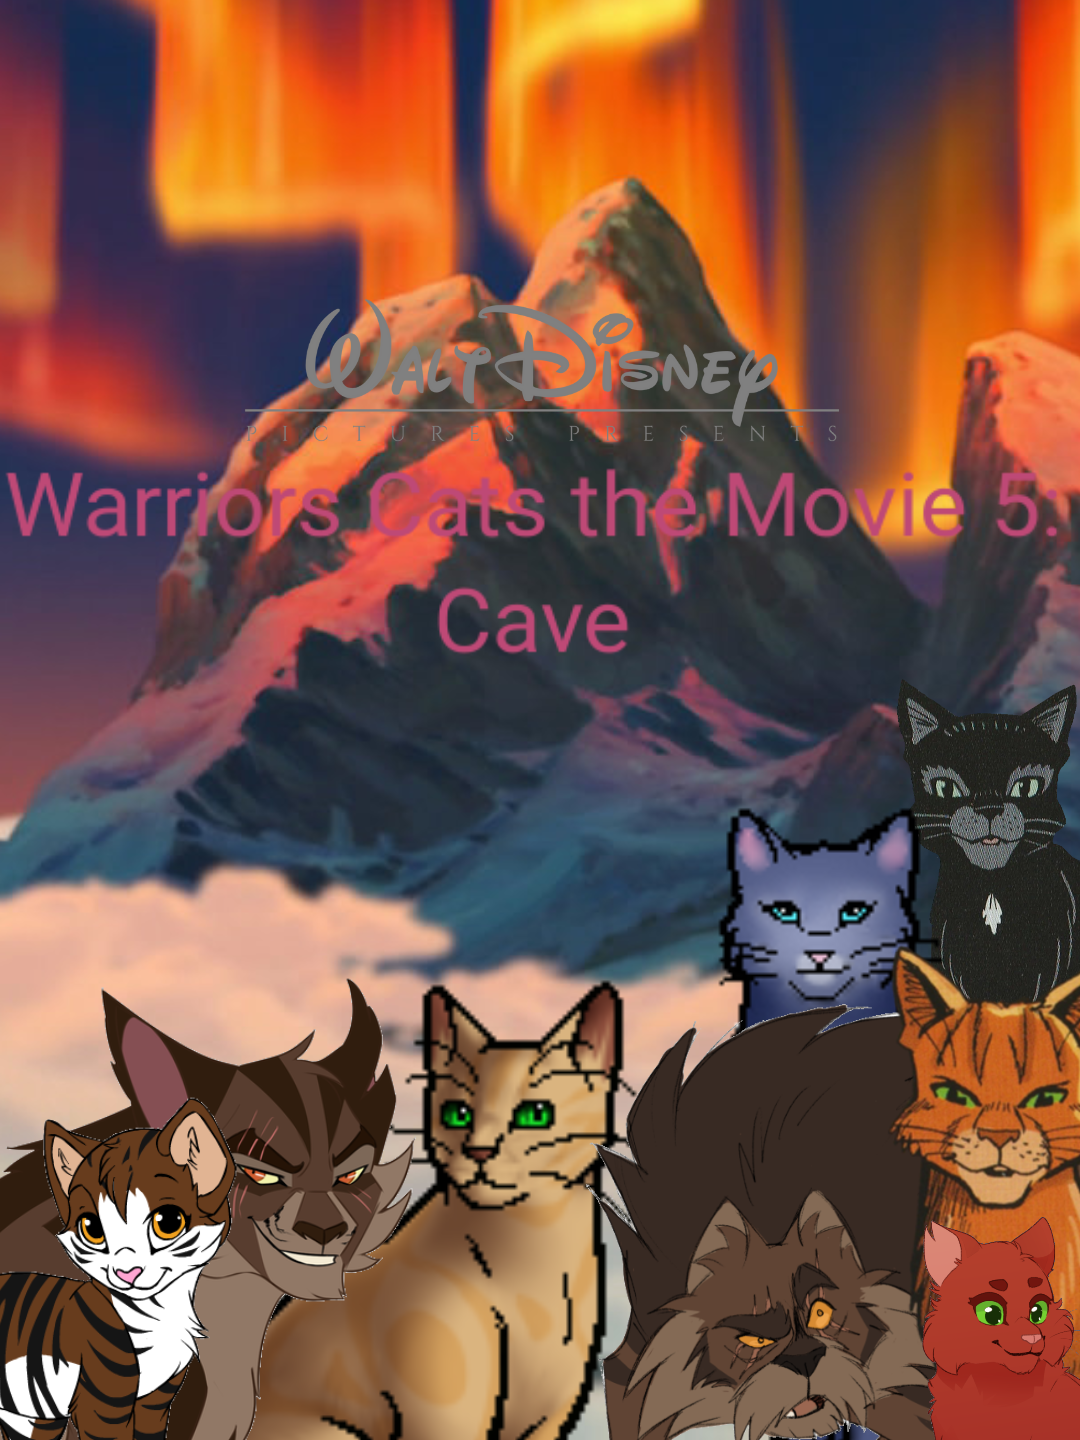 Warriors Cats the Movie 5: Cave (2017), Pachirapong Wiki